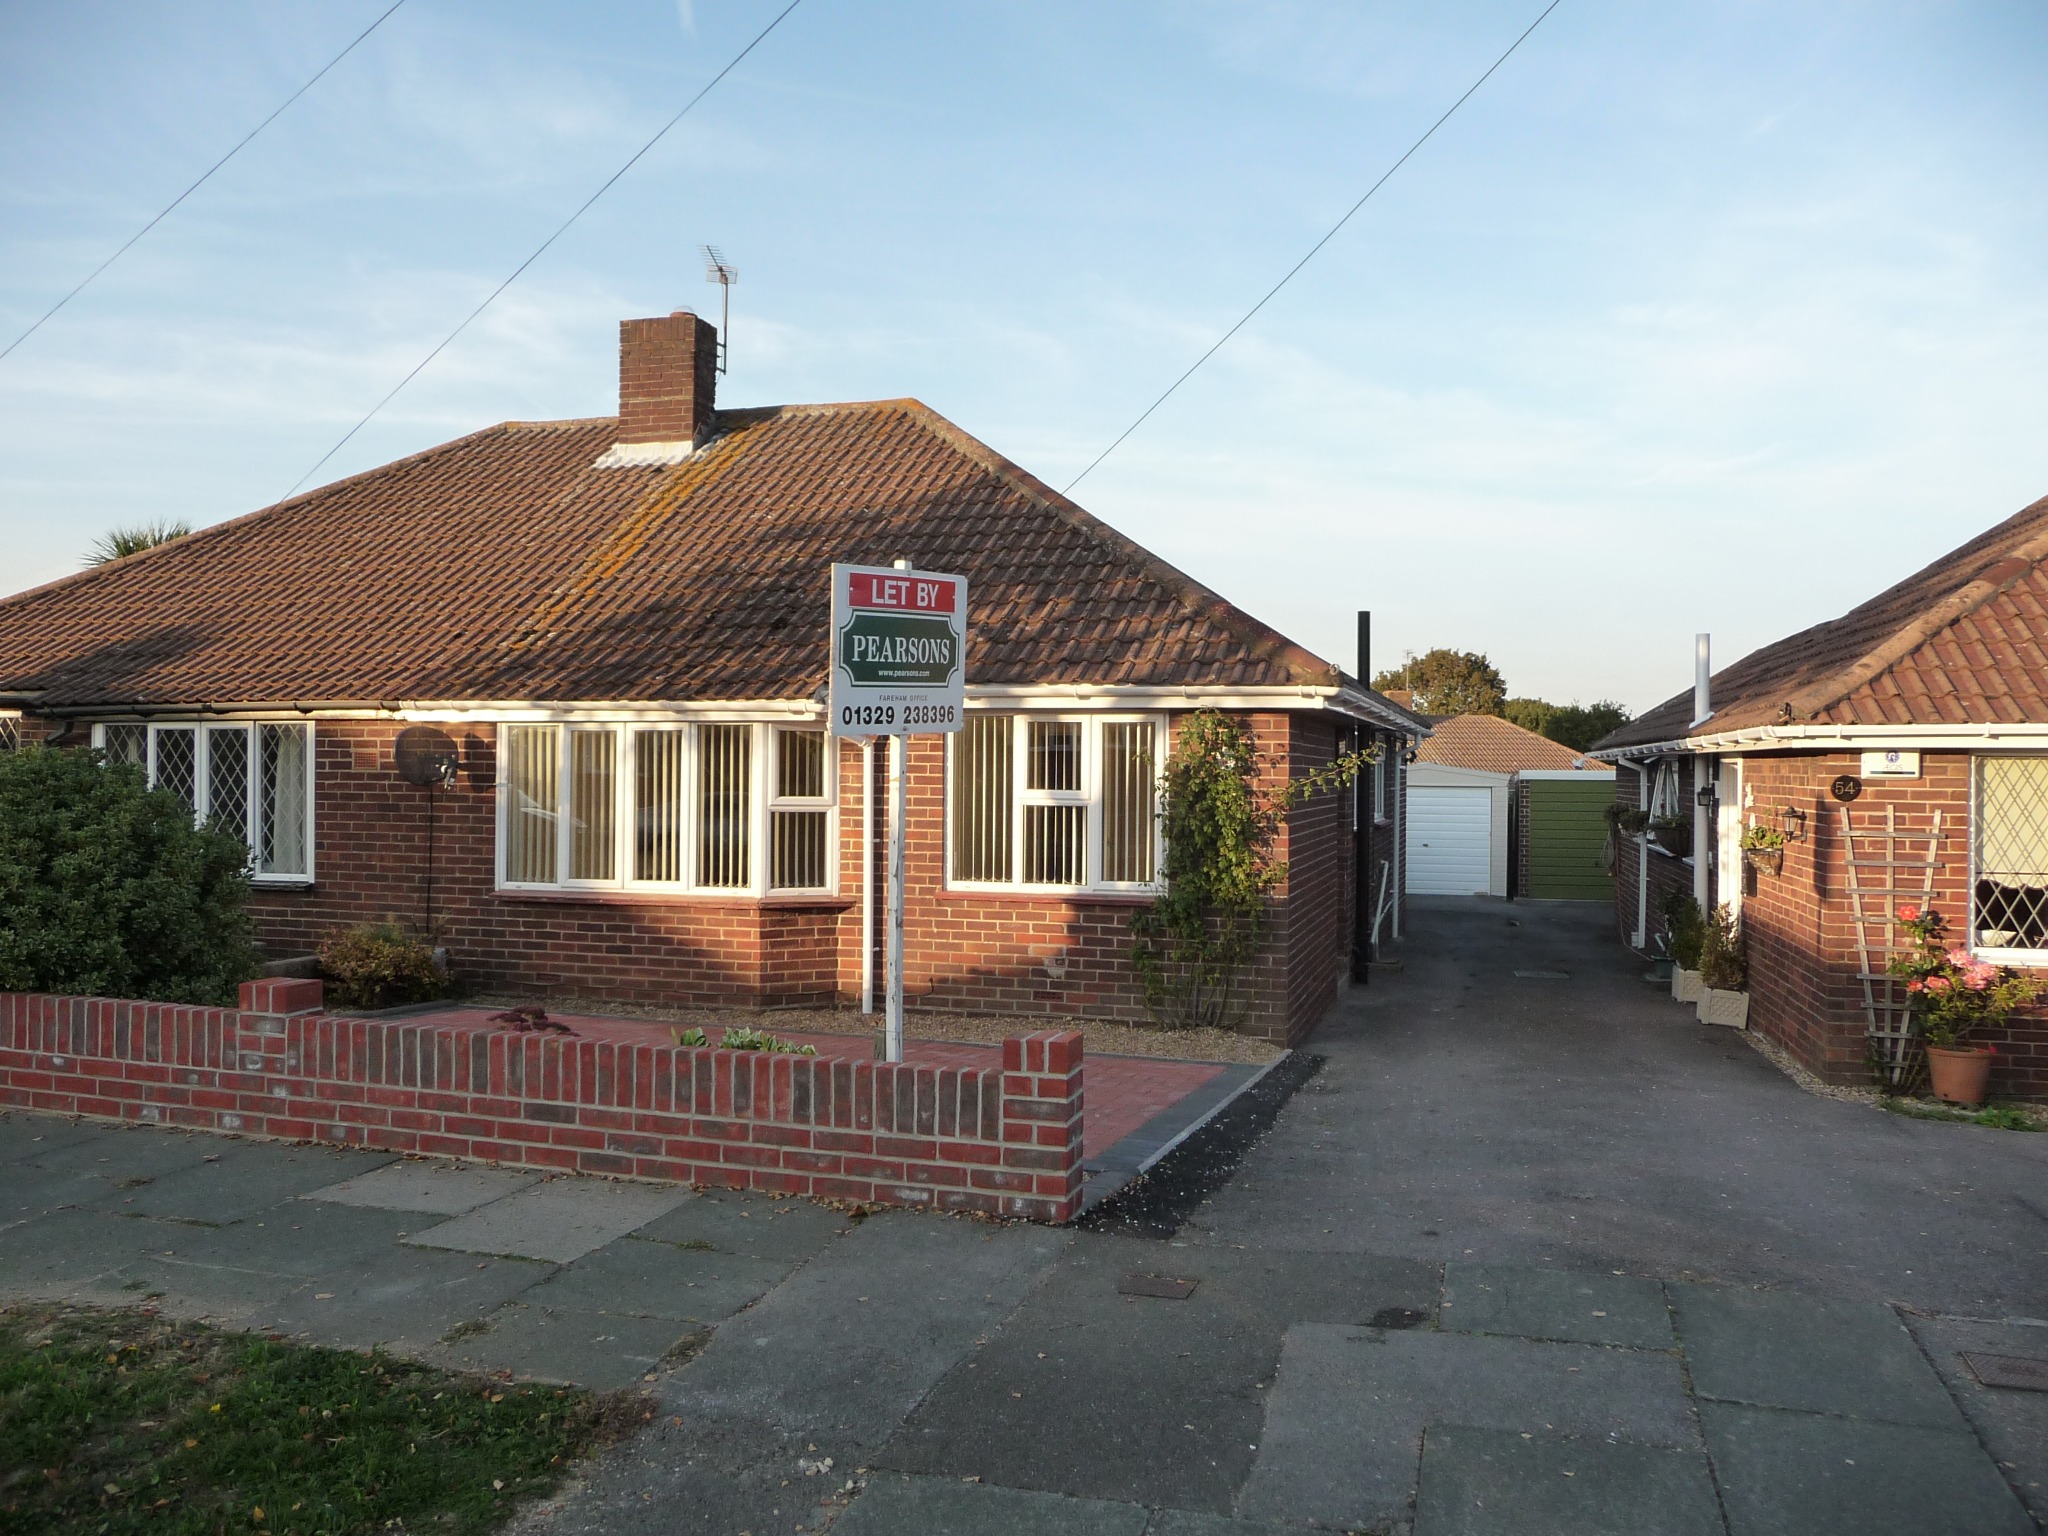 2 bed Semi-detached bungalow for rent in Fareham. From Pearsons Estate Agents - Fareham